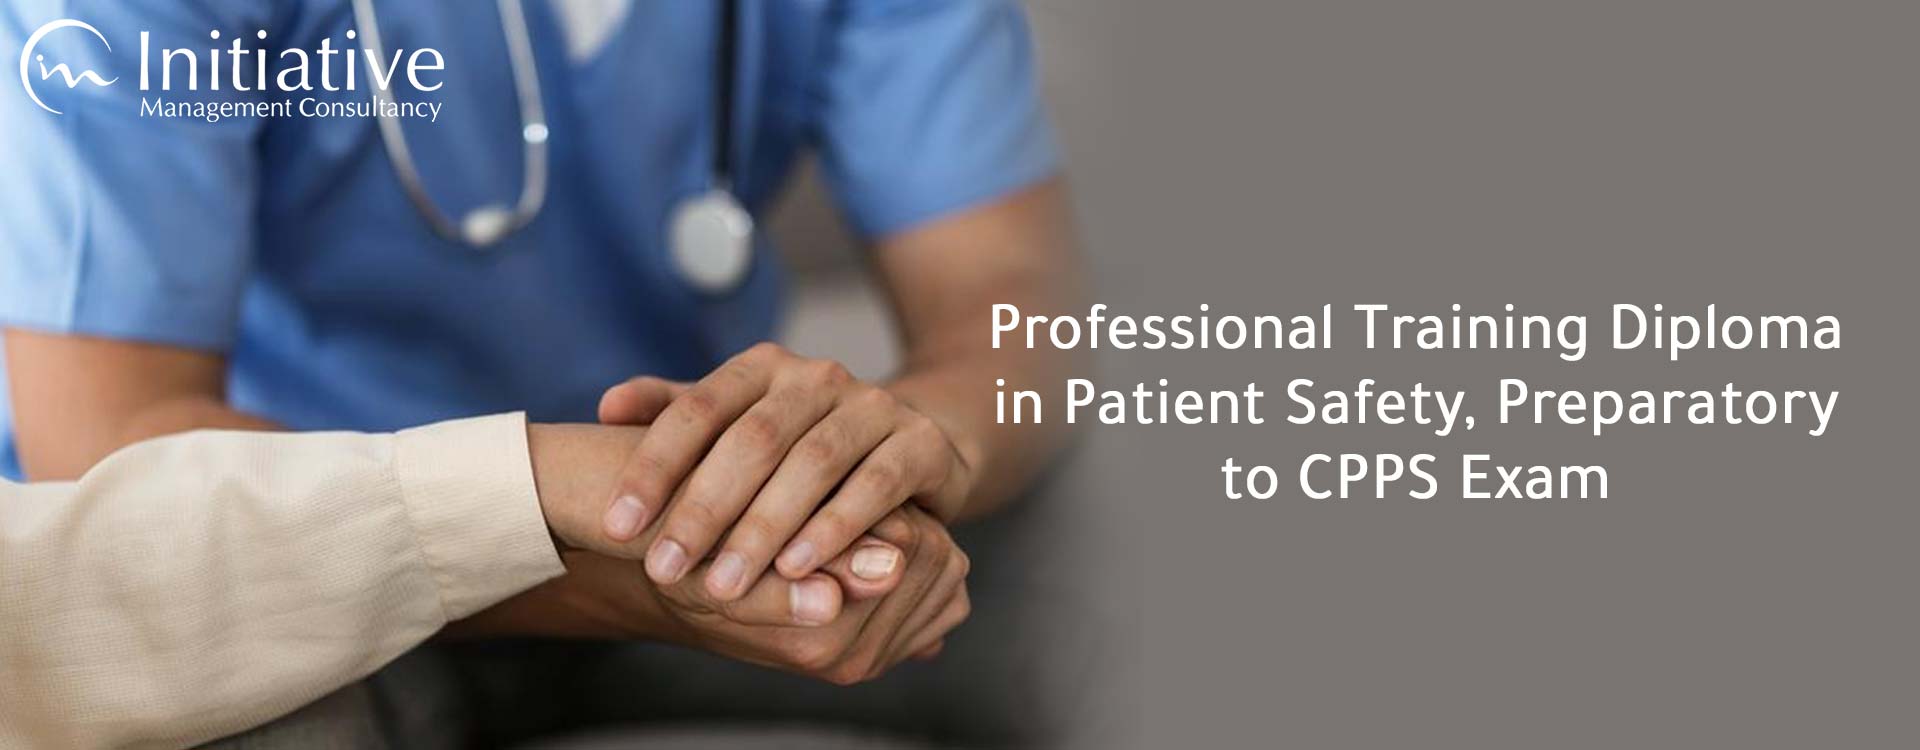 Professional Training Diploma in Patient Safety, Preparatory to CPPS Exam